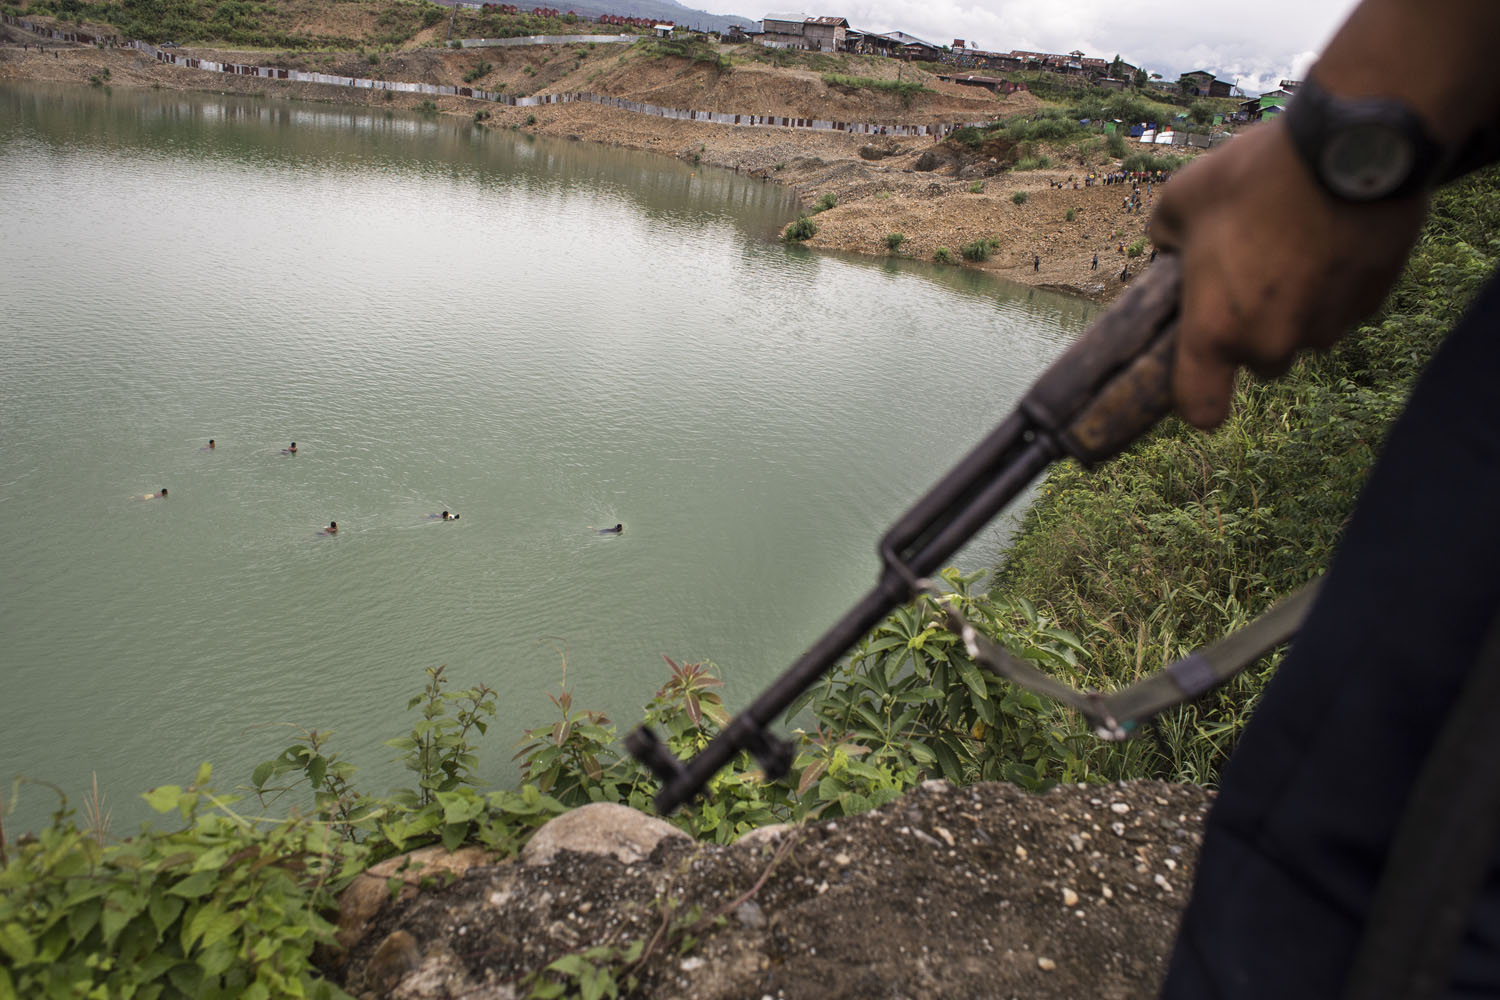 A group of illegal jade miners swim across the water as they try to escape an arrest by the police and the military forces, in a jade mining site, Hpakant, July 2014. Military officials say the miners are illegal and endangering a school located above. But the miners say they are being extorted for bribe money, which could be as much as 50,000 kyats ($40) per head